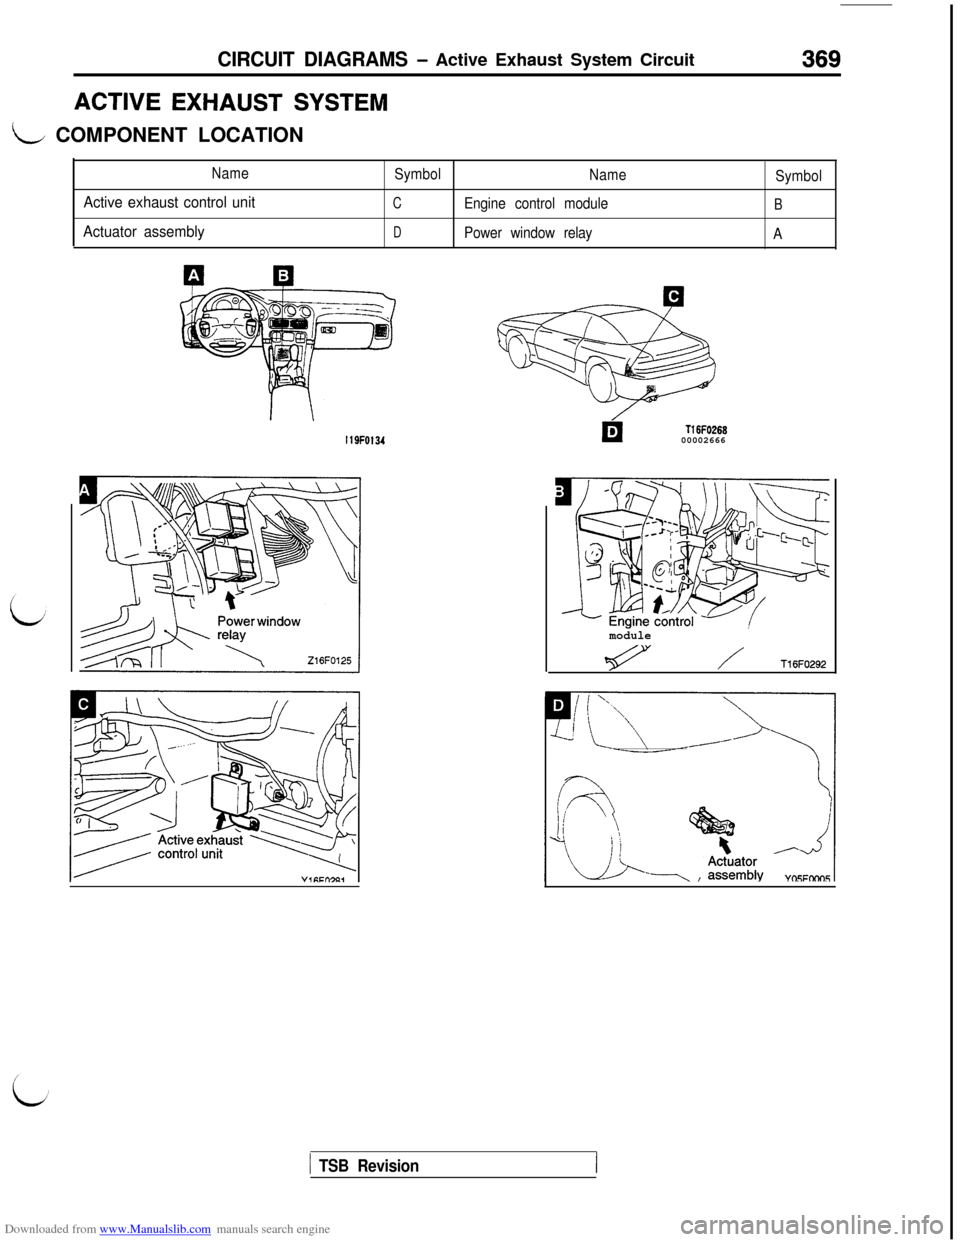 MITSUBISHI 3000GT 1995 2.G Workshop Manual Downloaded from www.Manualslib.com manuals search engine CIRCUIT DIAGRAMS - Active Exhaust System CircuitACTIVE 
EXHAUST SYSTEM
L/ COMPONENT LOCATION
Name
Symbol
Name
Active exhaust control unitCEngin